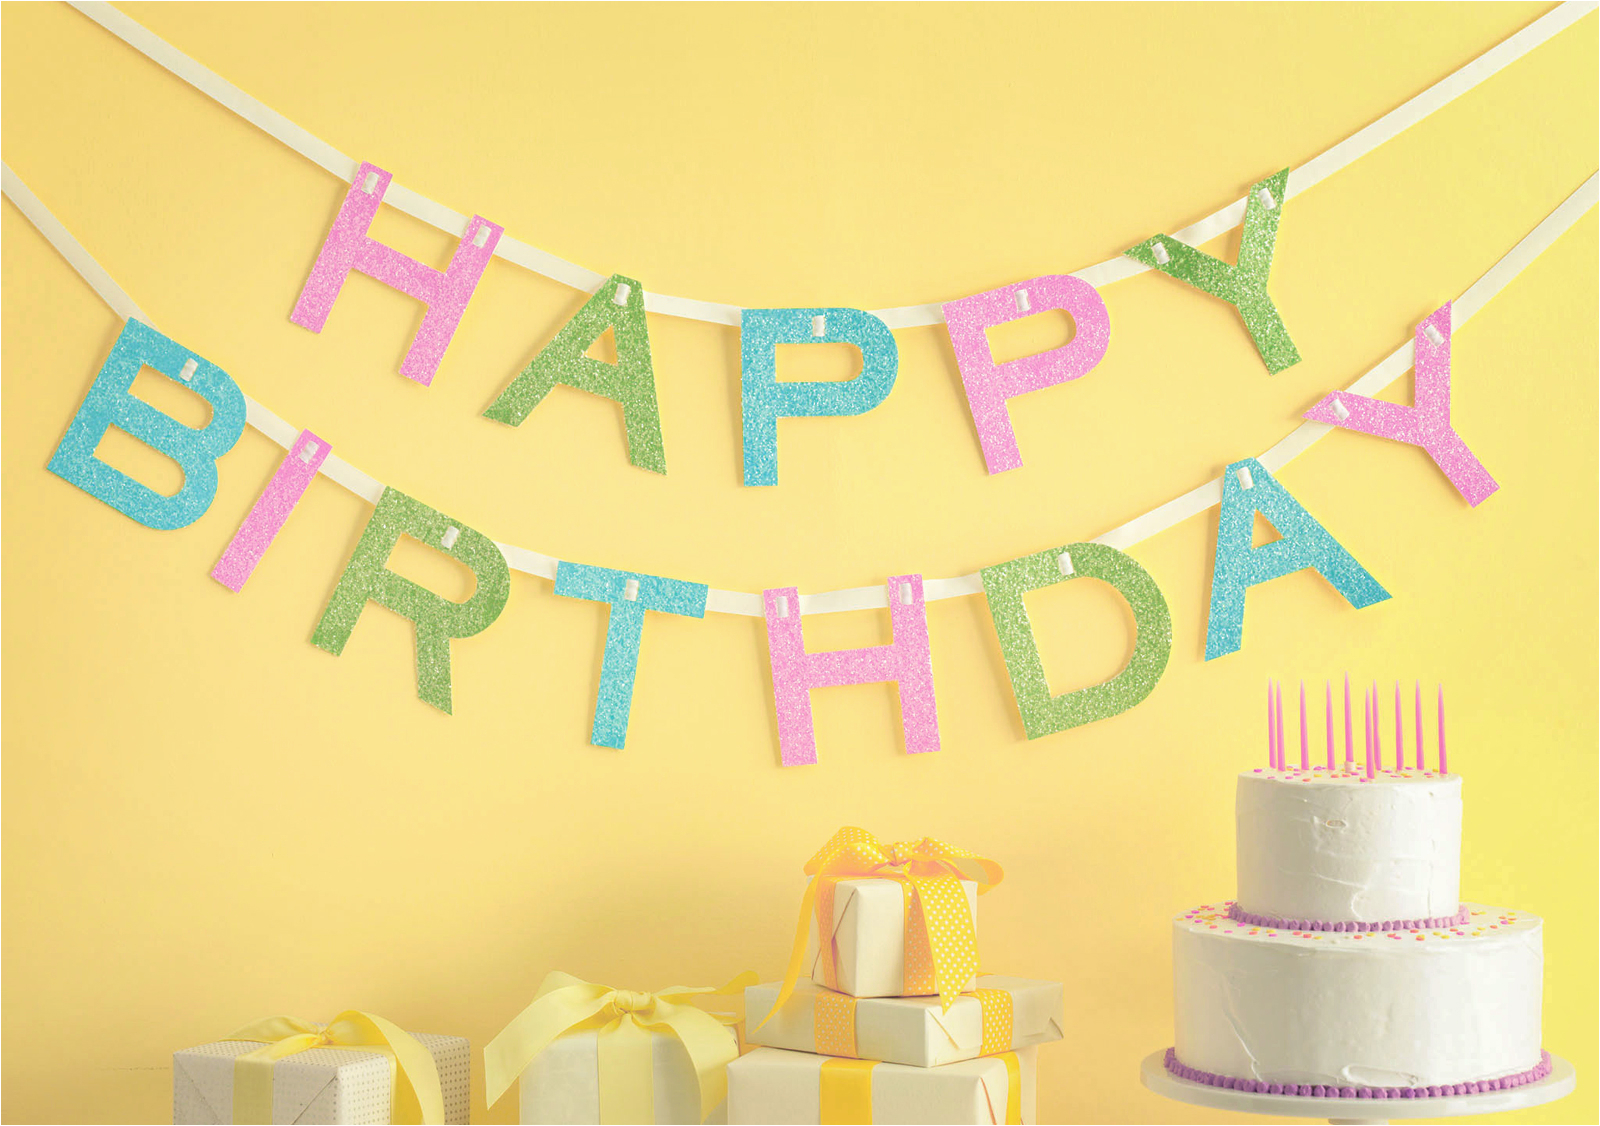 Make A Happy Birthday Banner Online Beautiful Happy Birthday Signs with Banners